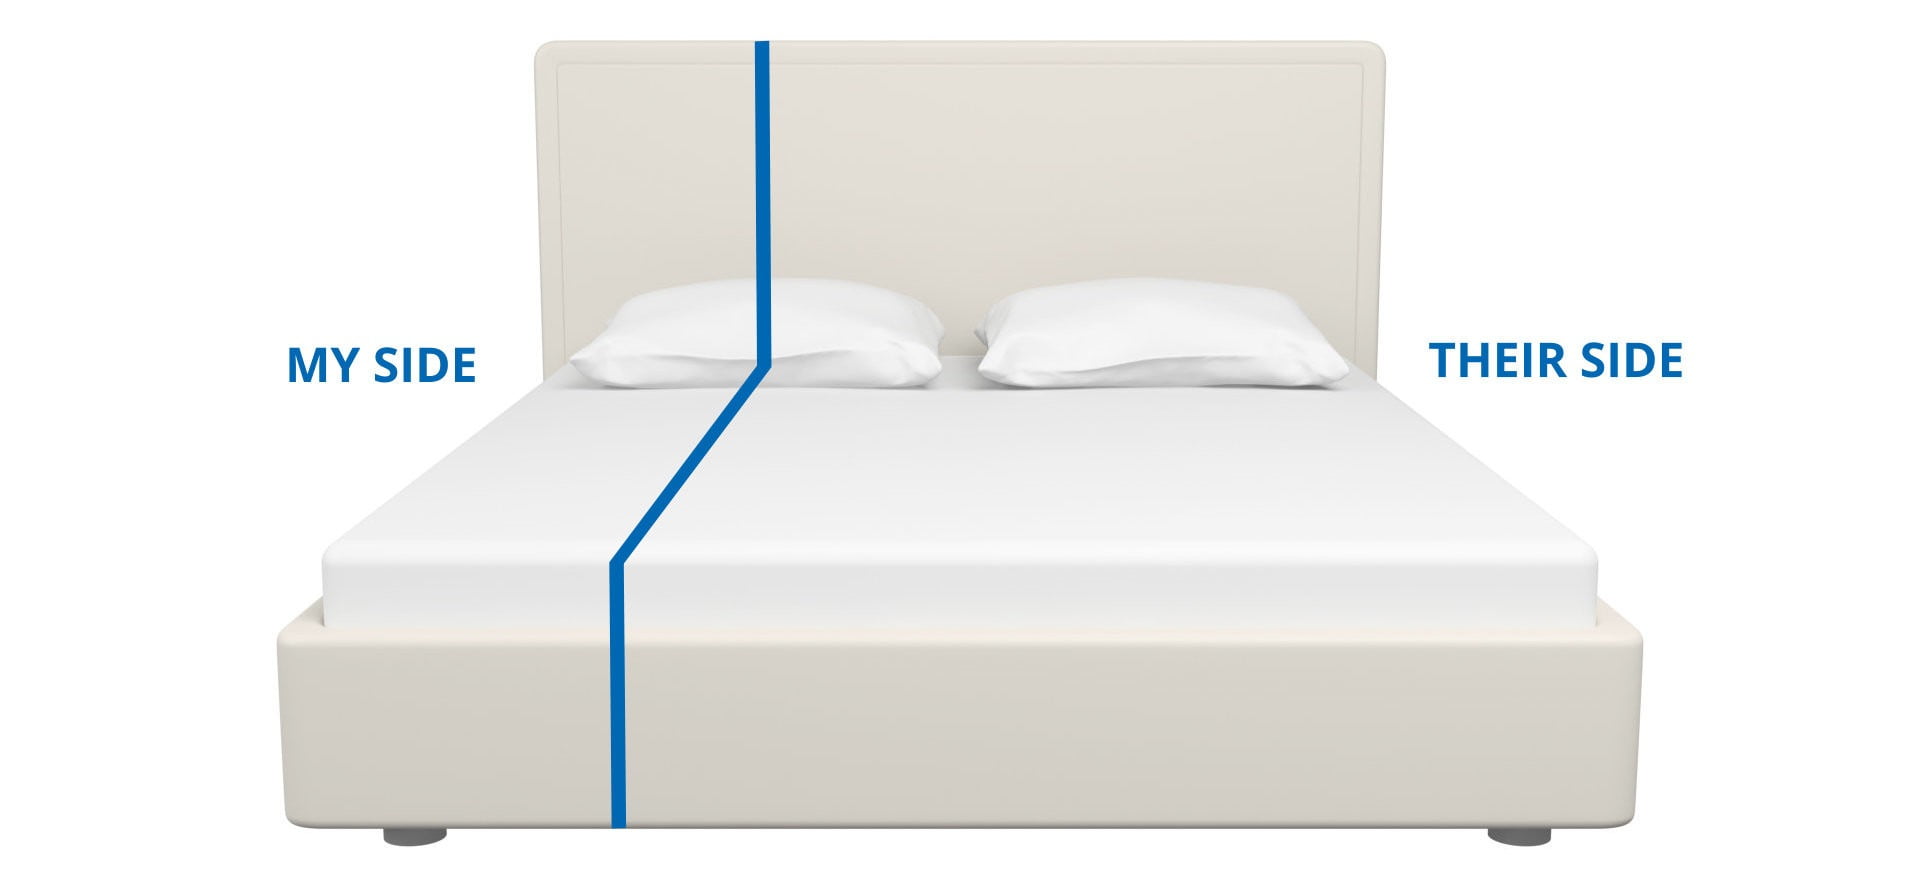 Bed Sizes Uk And Mattress Size, Is There A Bed Size Bigger Than Super King